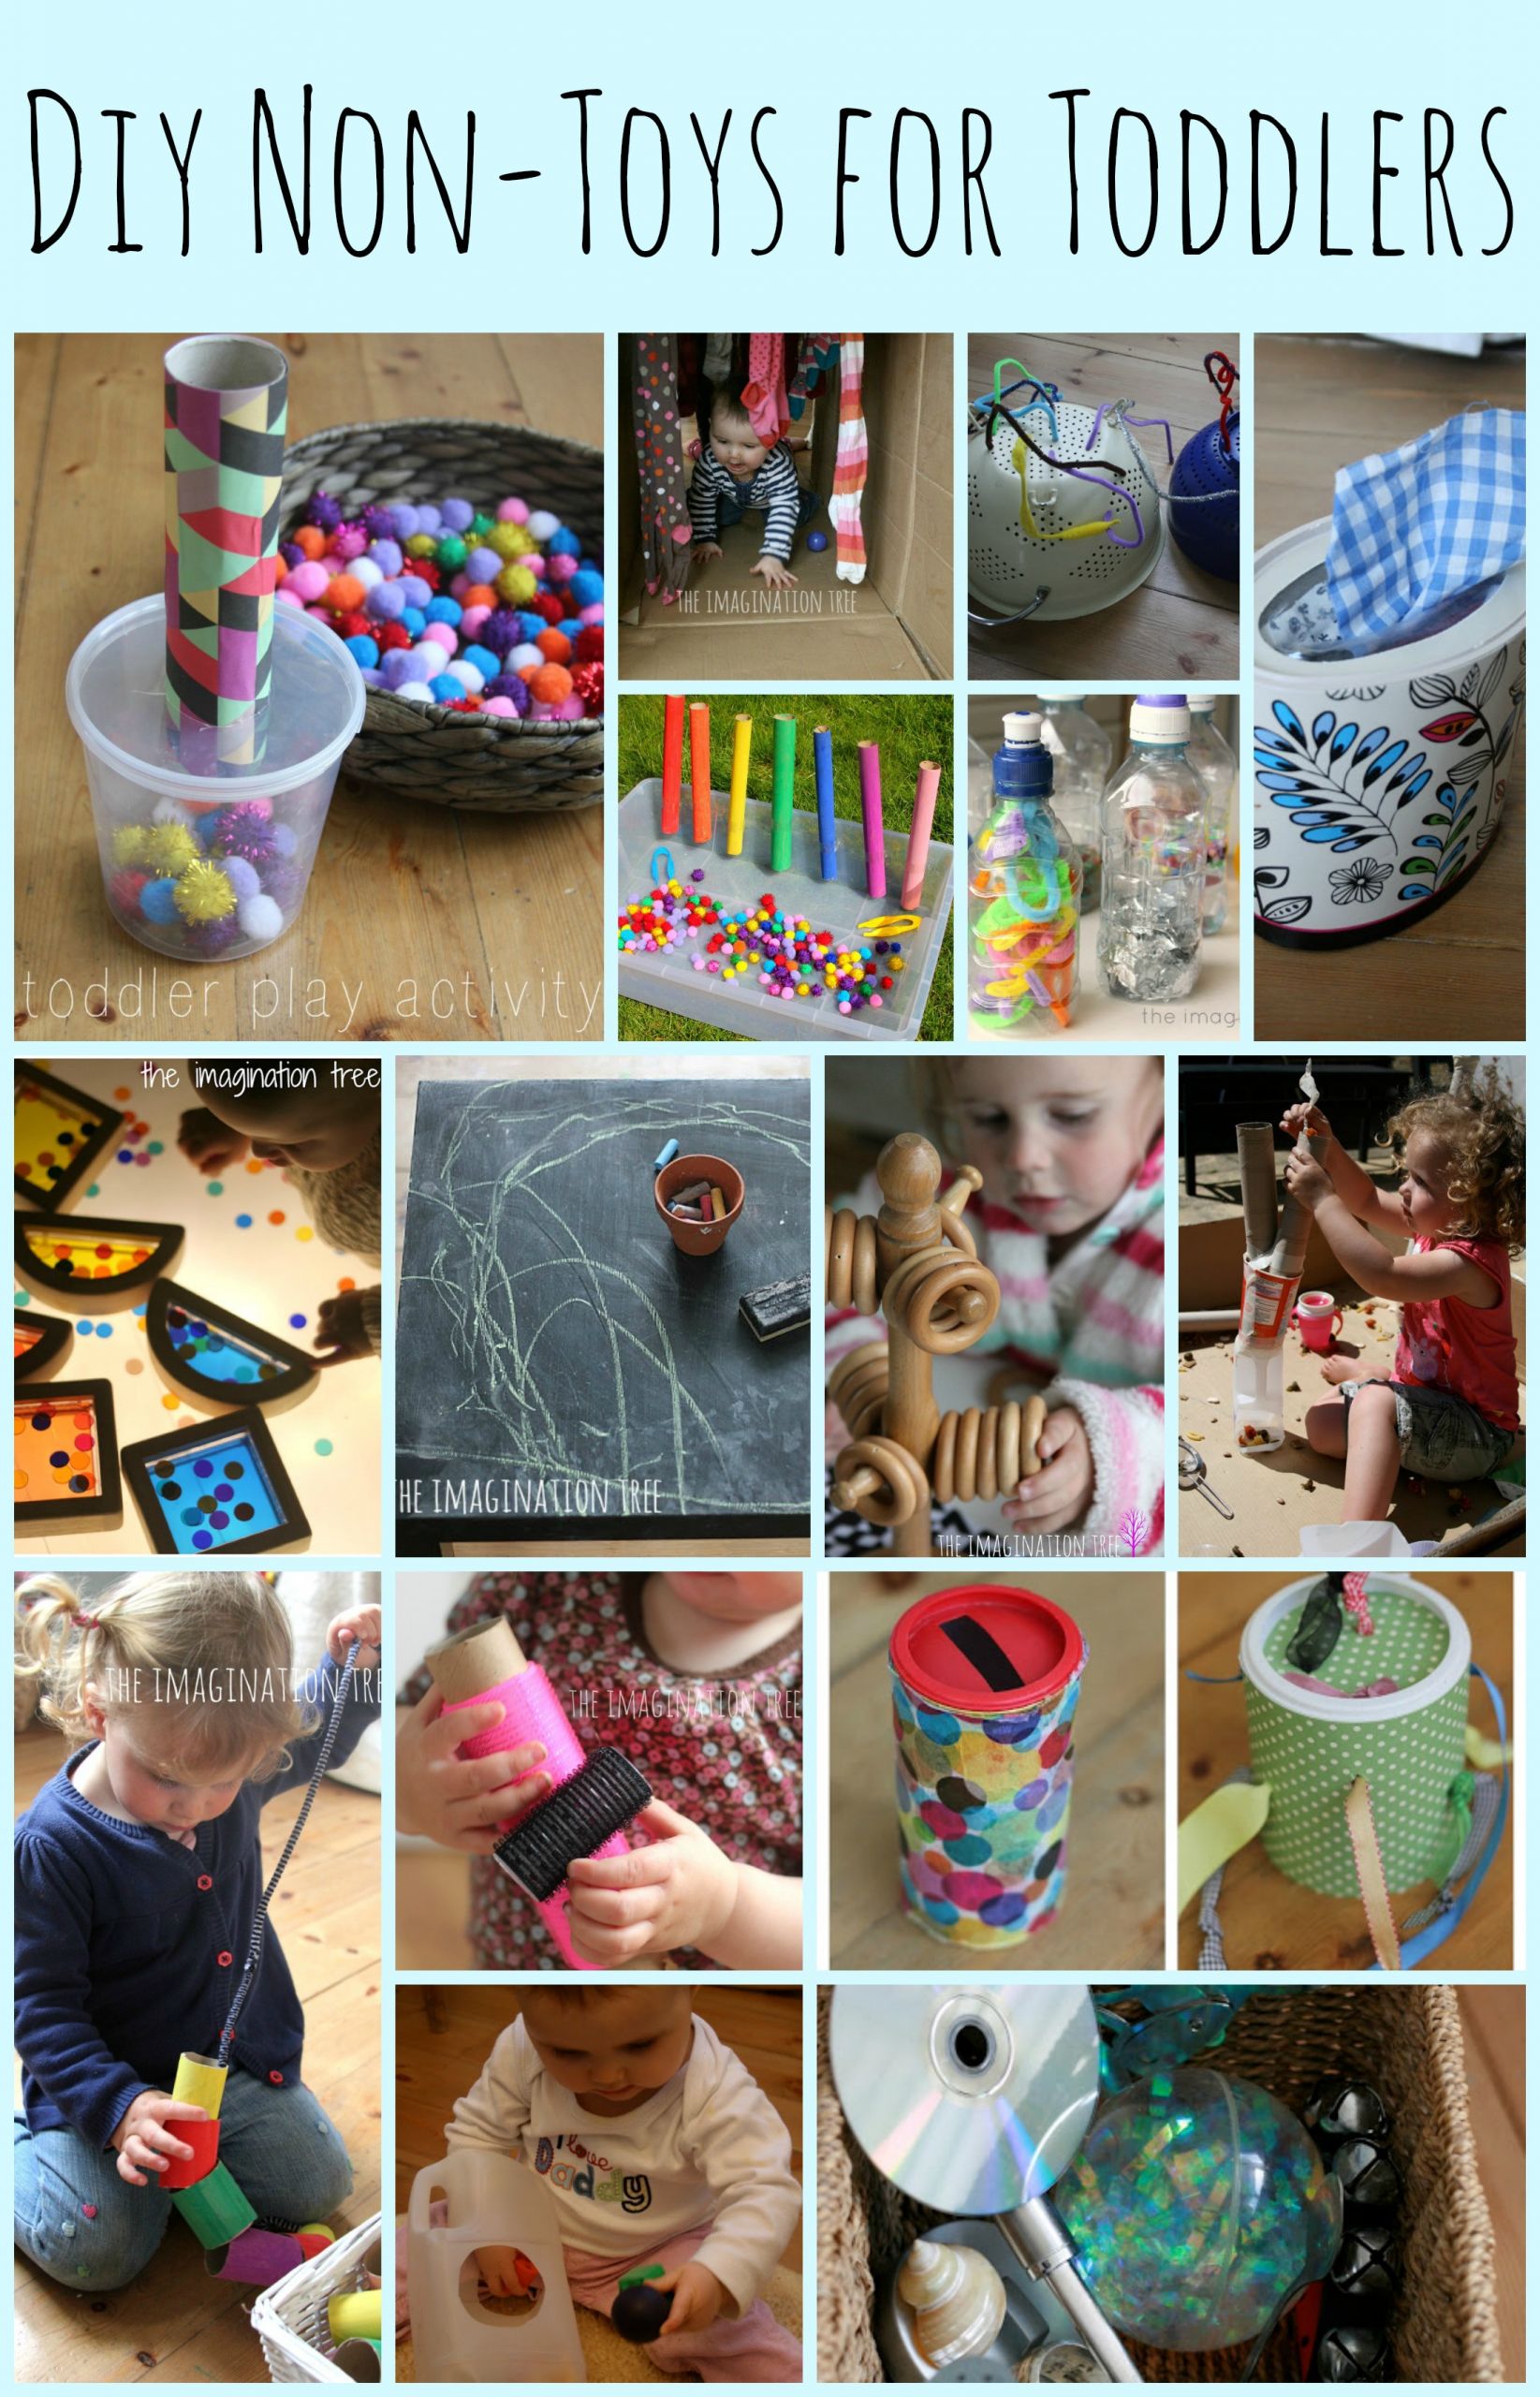 DIY Activities For Toddlers
 15 DIY Non Toys for Toddlers